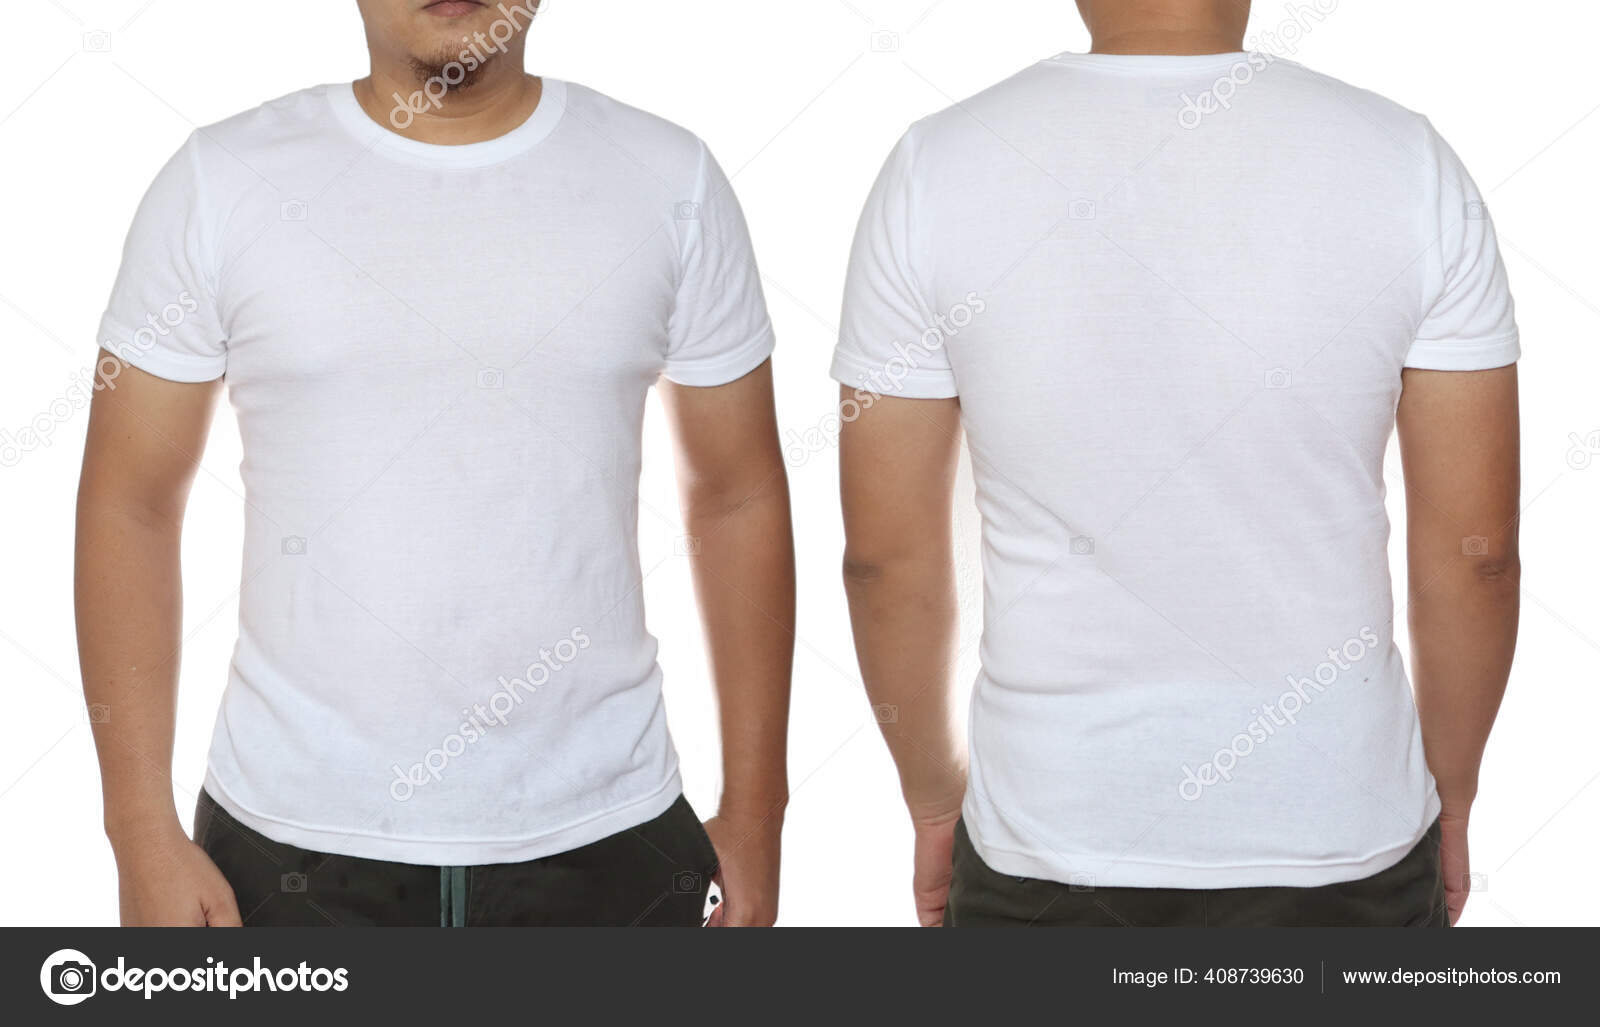 black-t-shirt-template-back-pngs-for-free-download